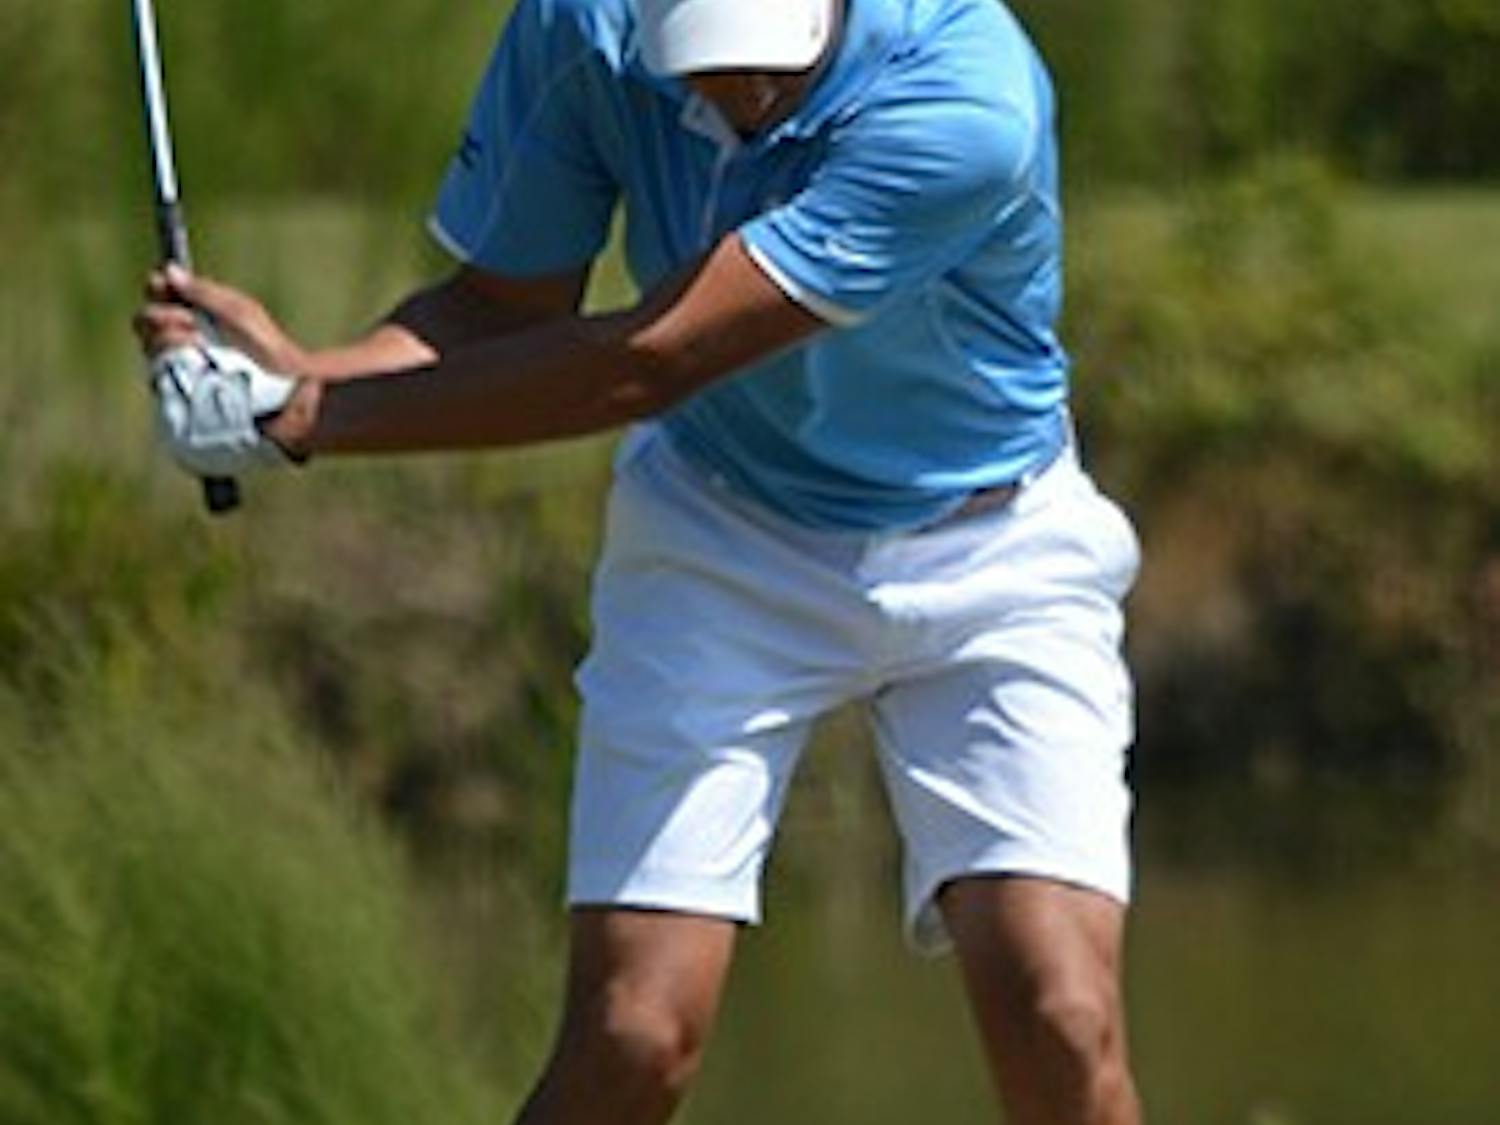 UNC placed fourth in the Tar Heel Intercollegiate tournament this weekend at UNC Finley golf course.